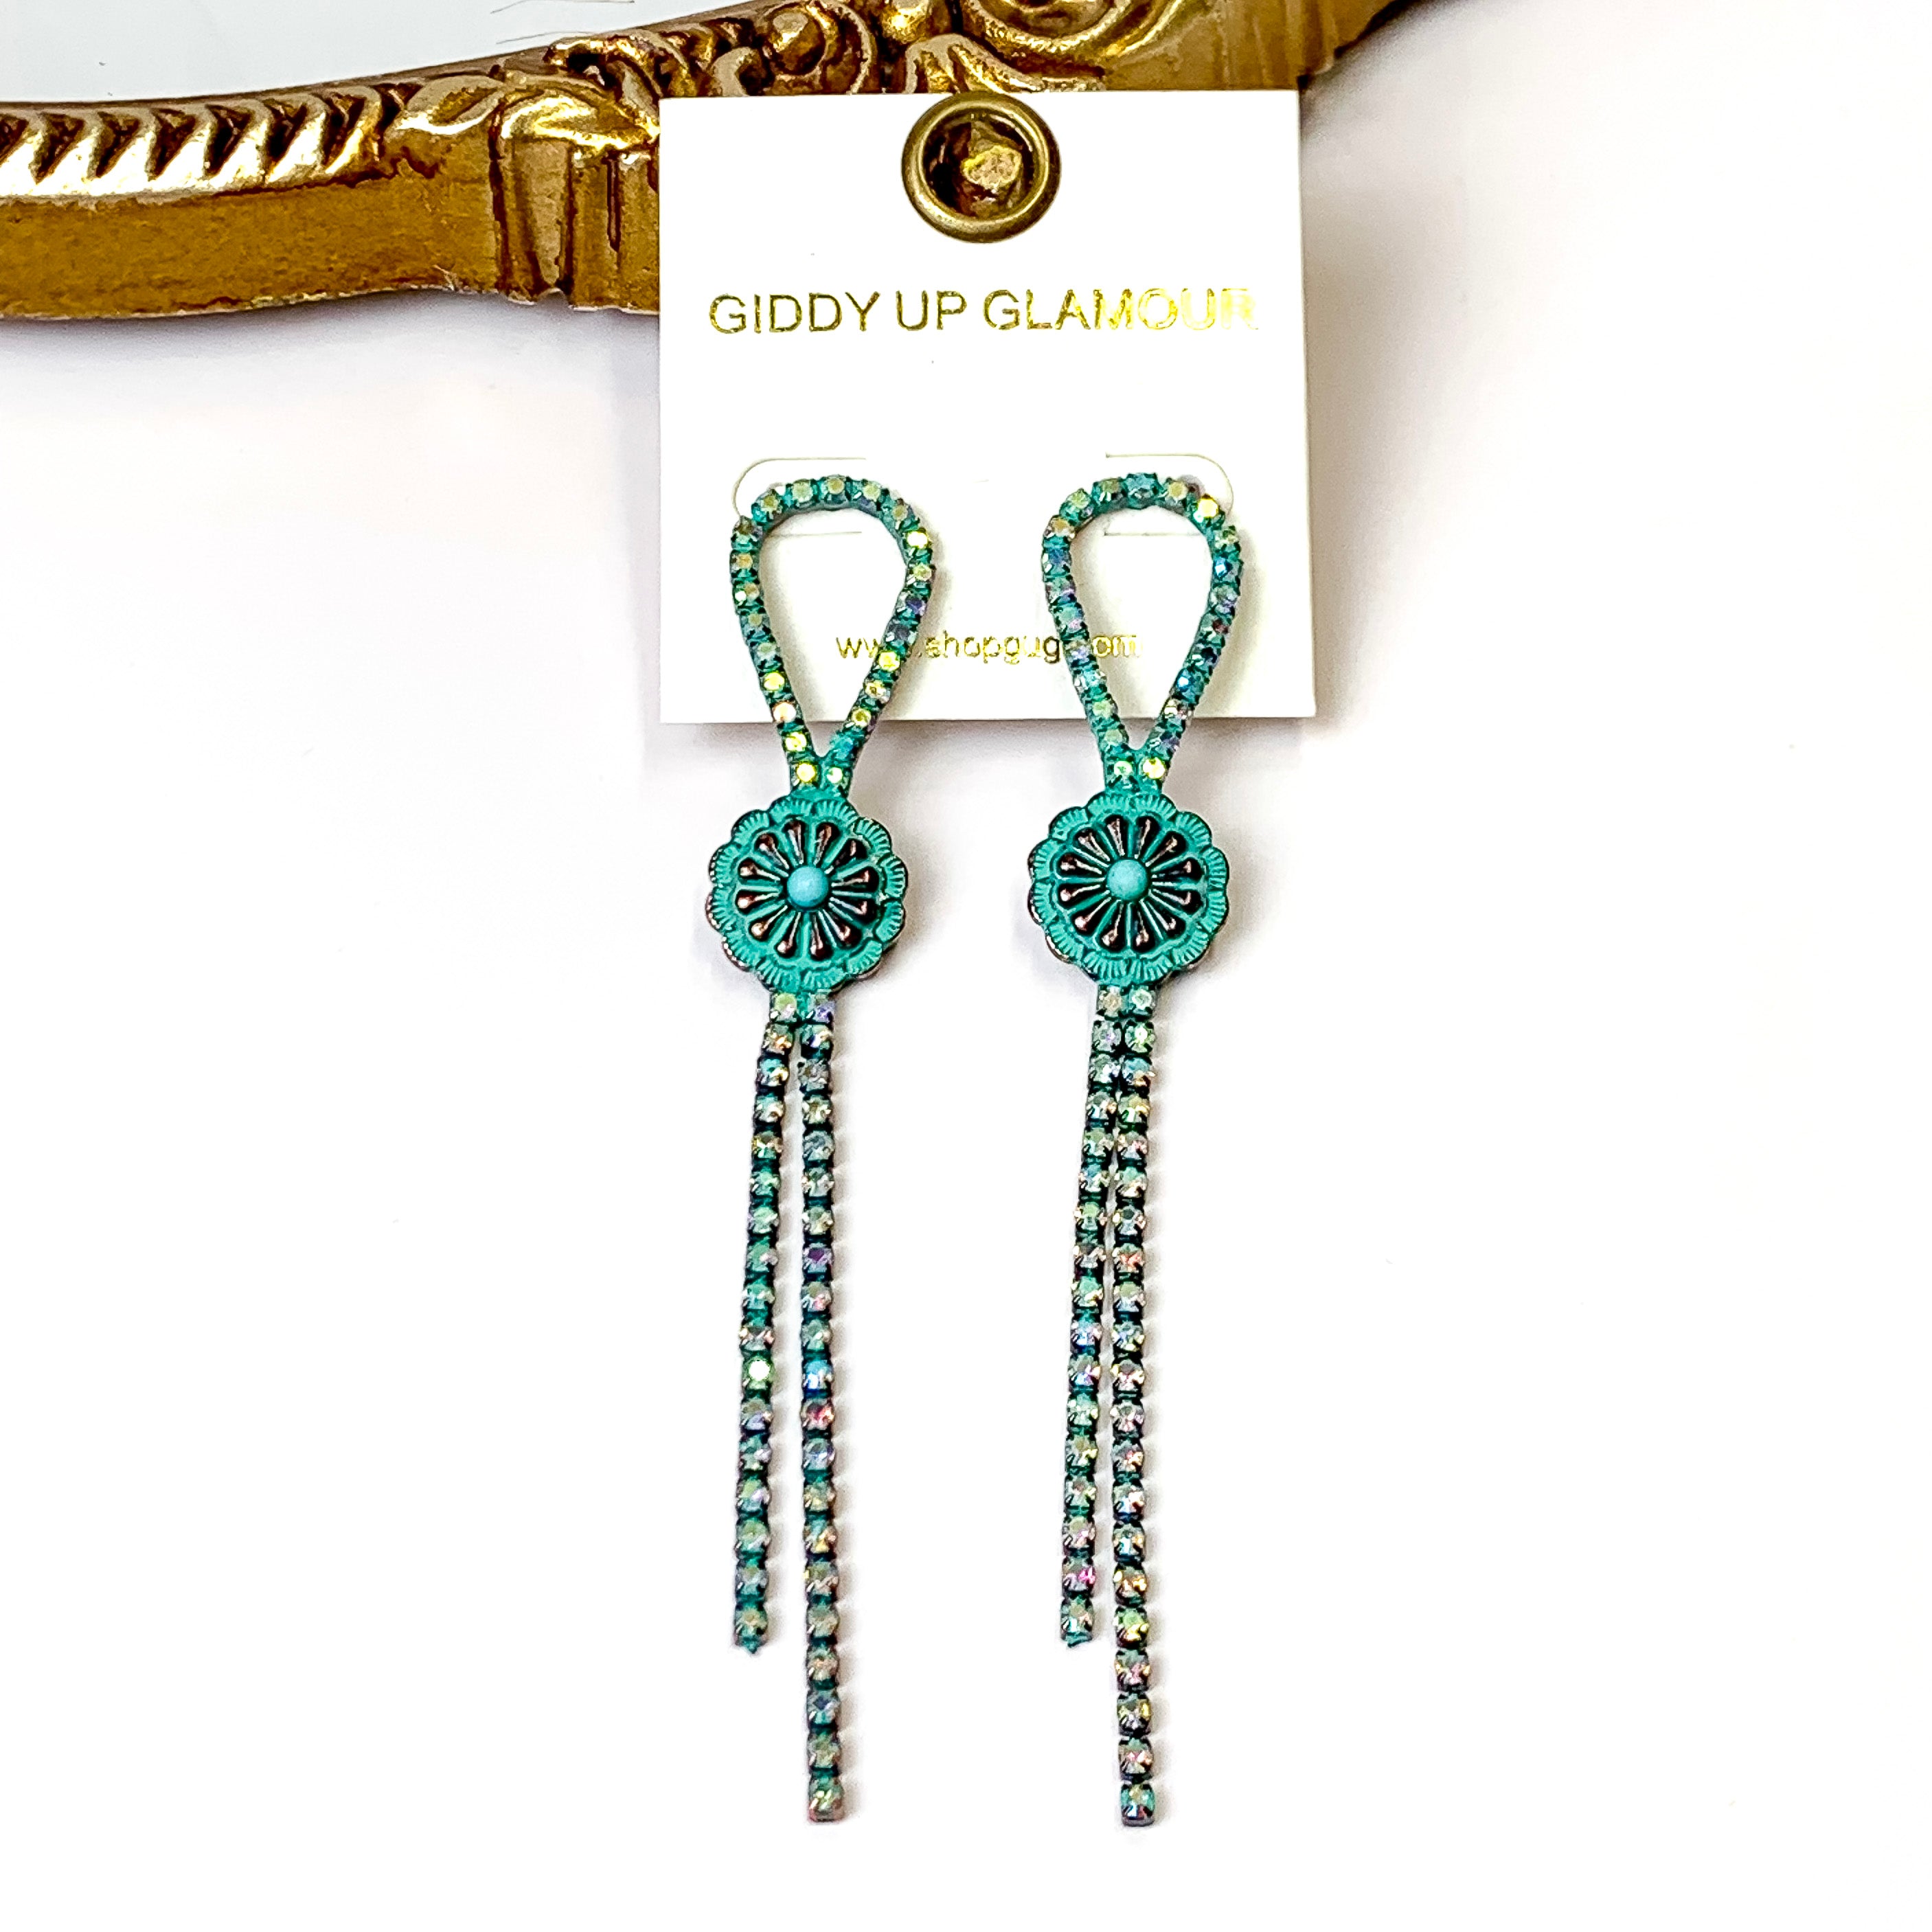 AB Crystal Bolo Tie Tassel Earrings with Circle Concho in Patina Tone - Giddy Up Glamour Boutique